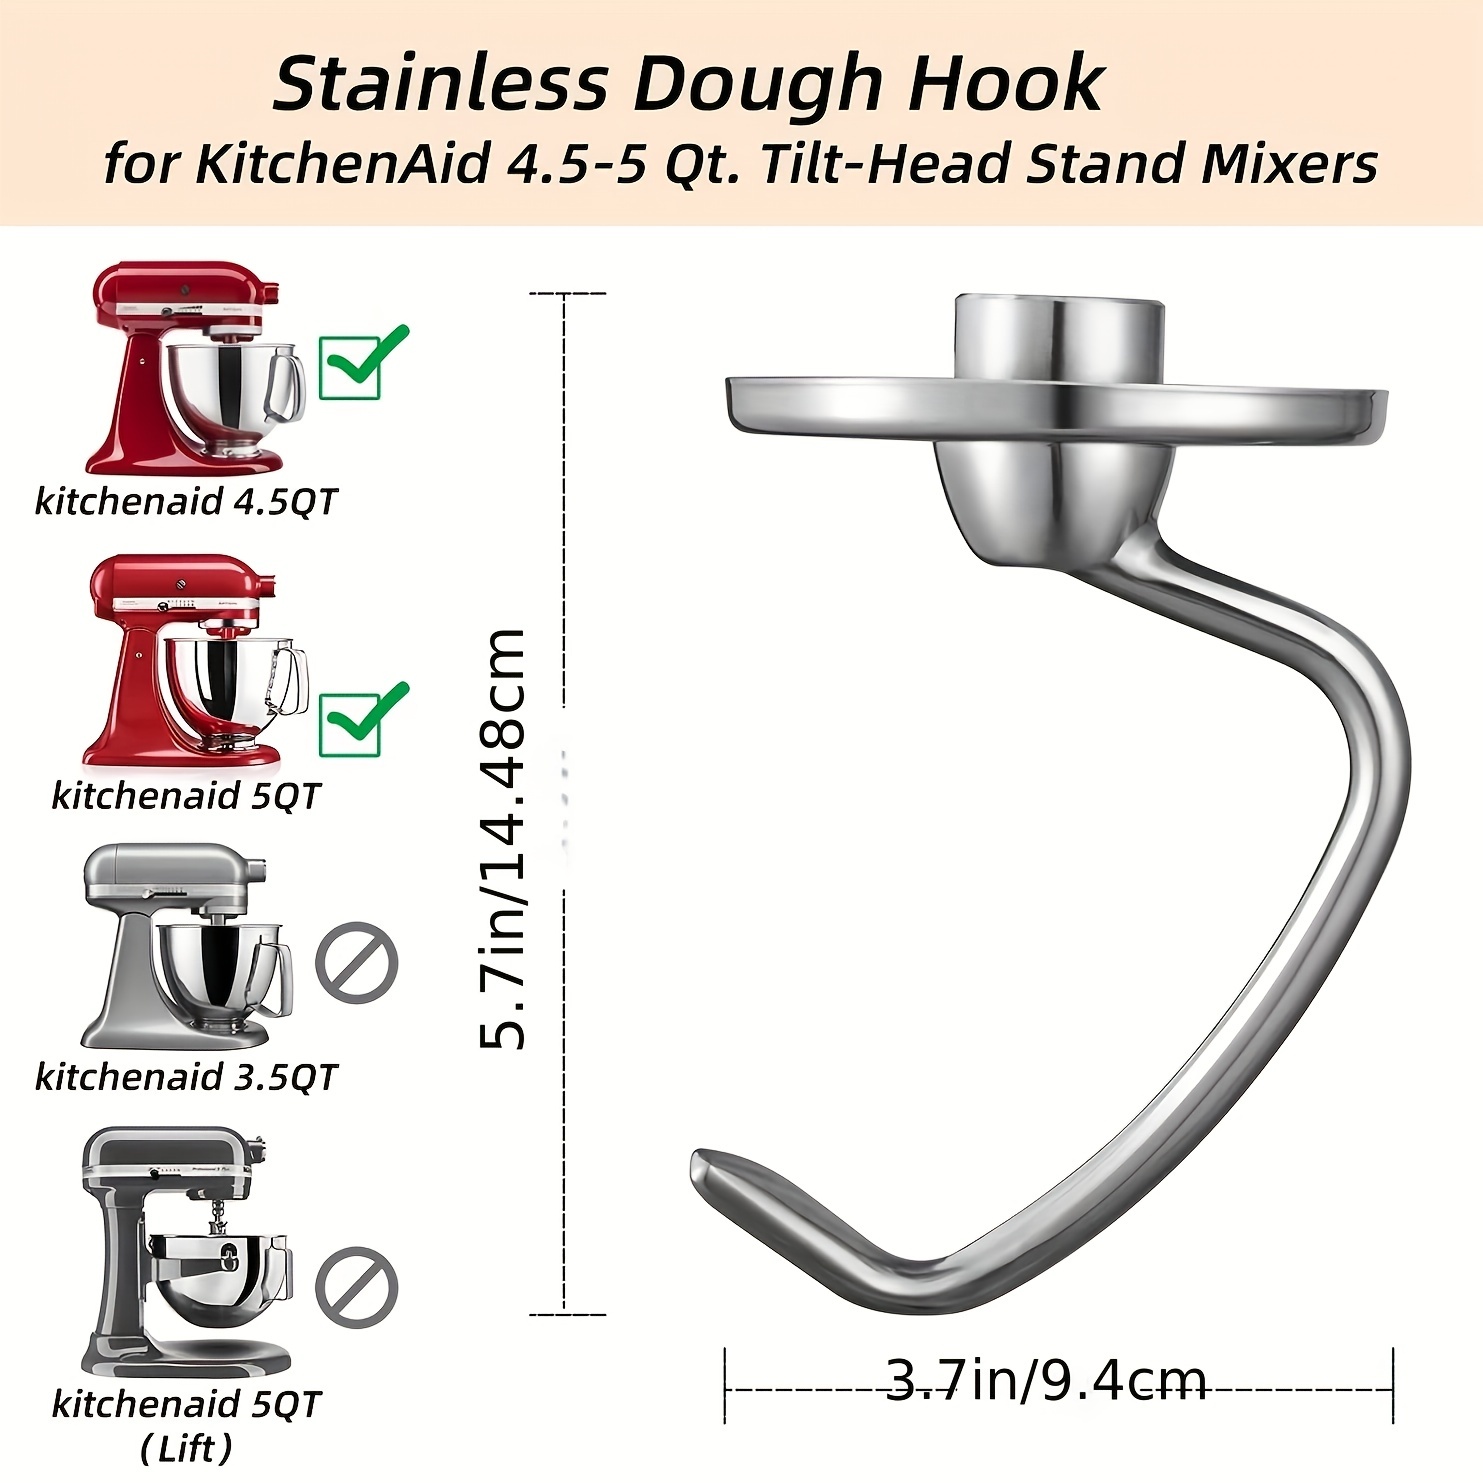 Kitchenaid Stainless Steel Spiral Dough Hook - Rustproof, Easy To